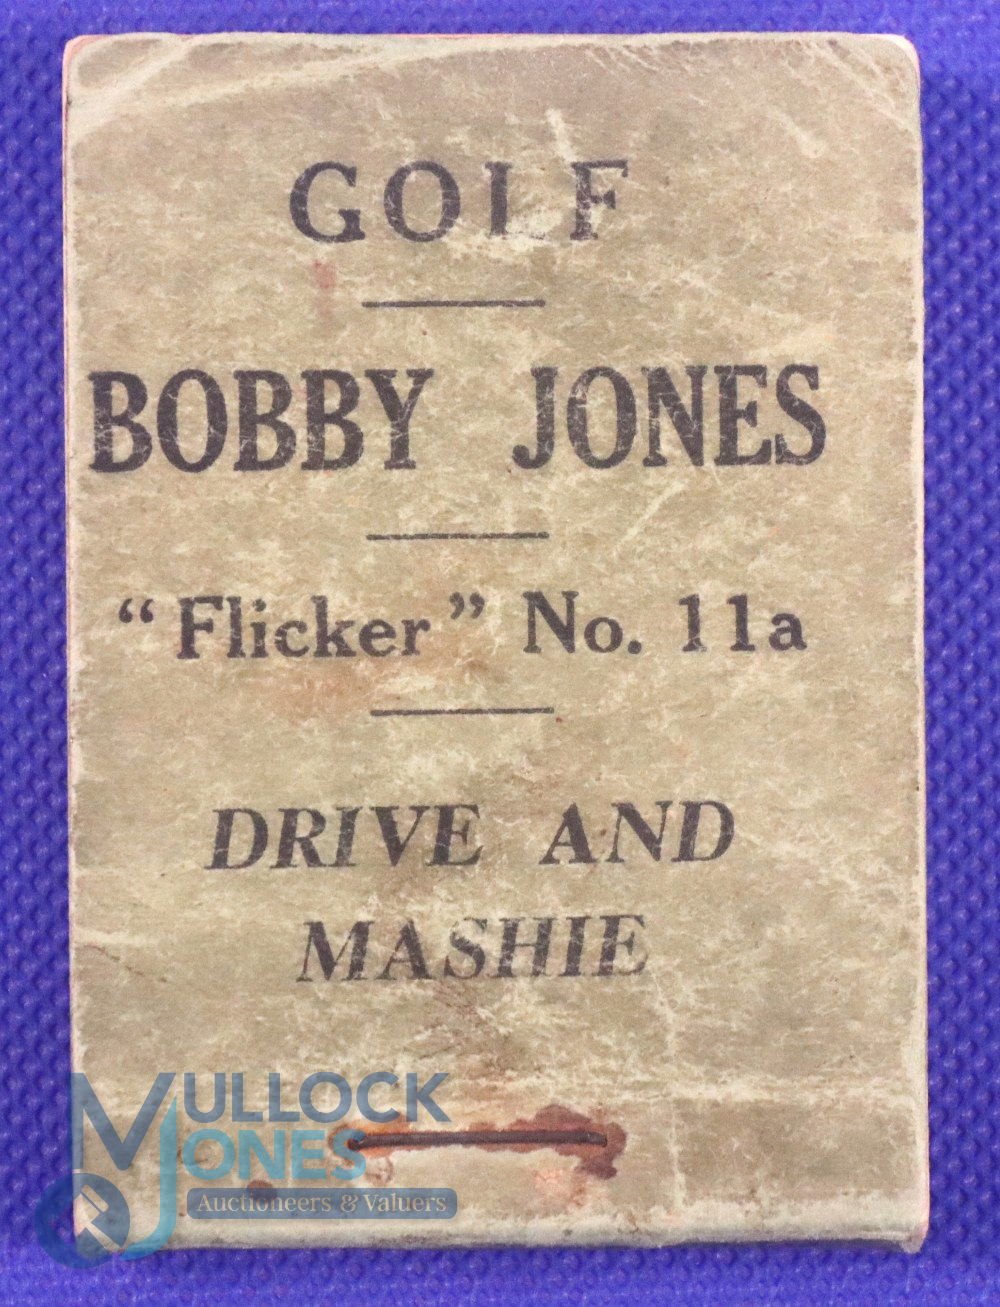 Rare 1930 Bobby Jones Golf Flicker Book No. 11a Drive and Mashie. Flip through this book to learn